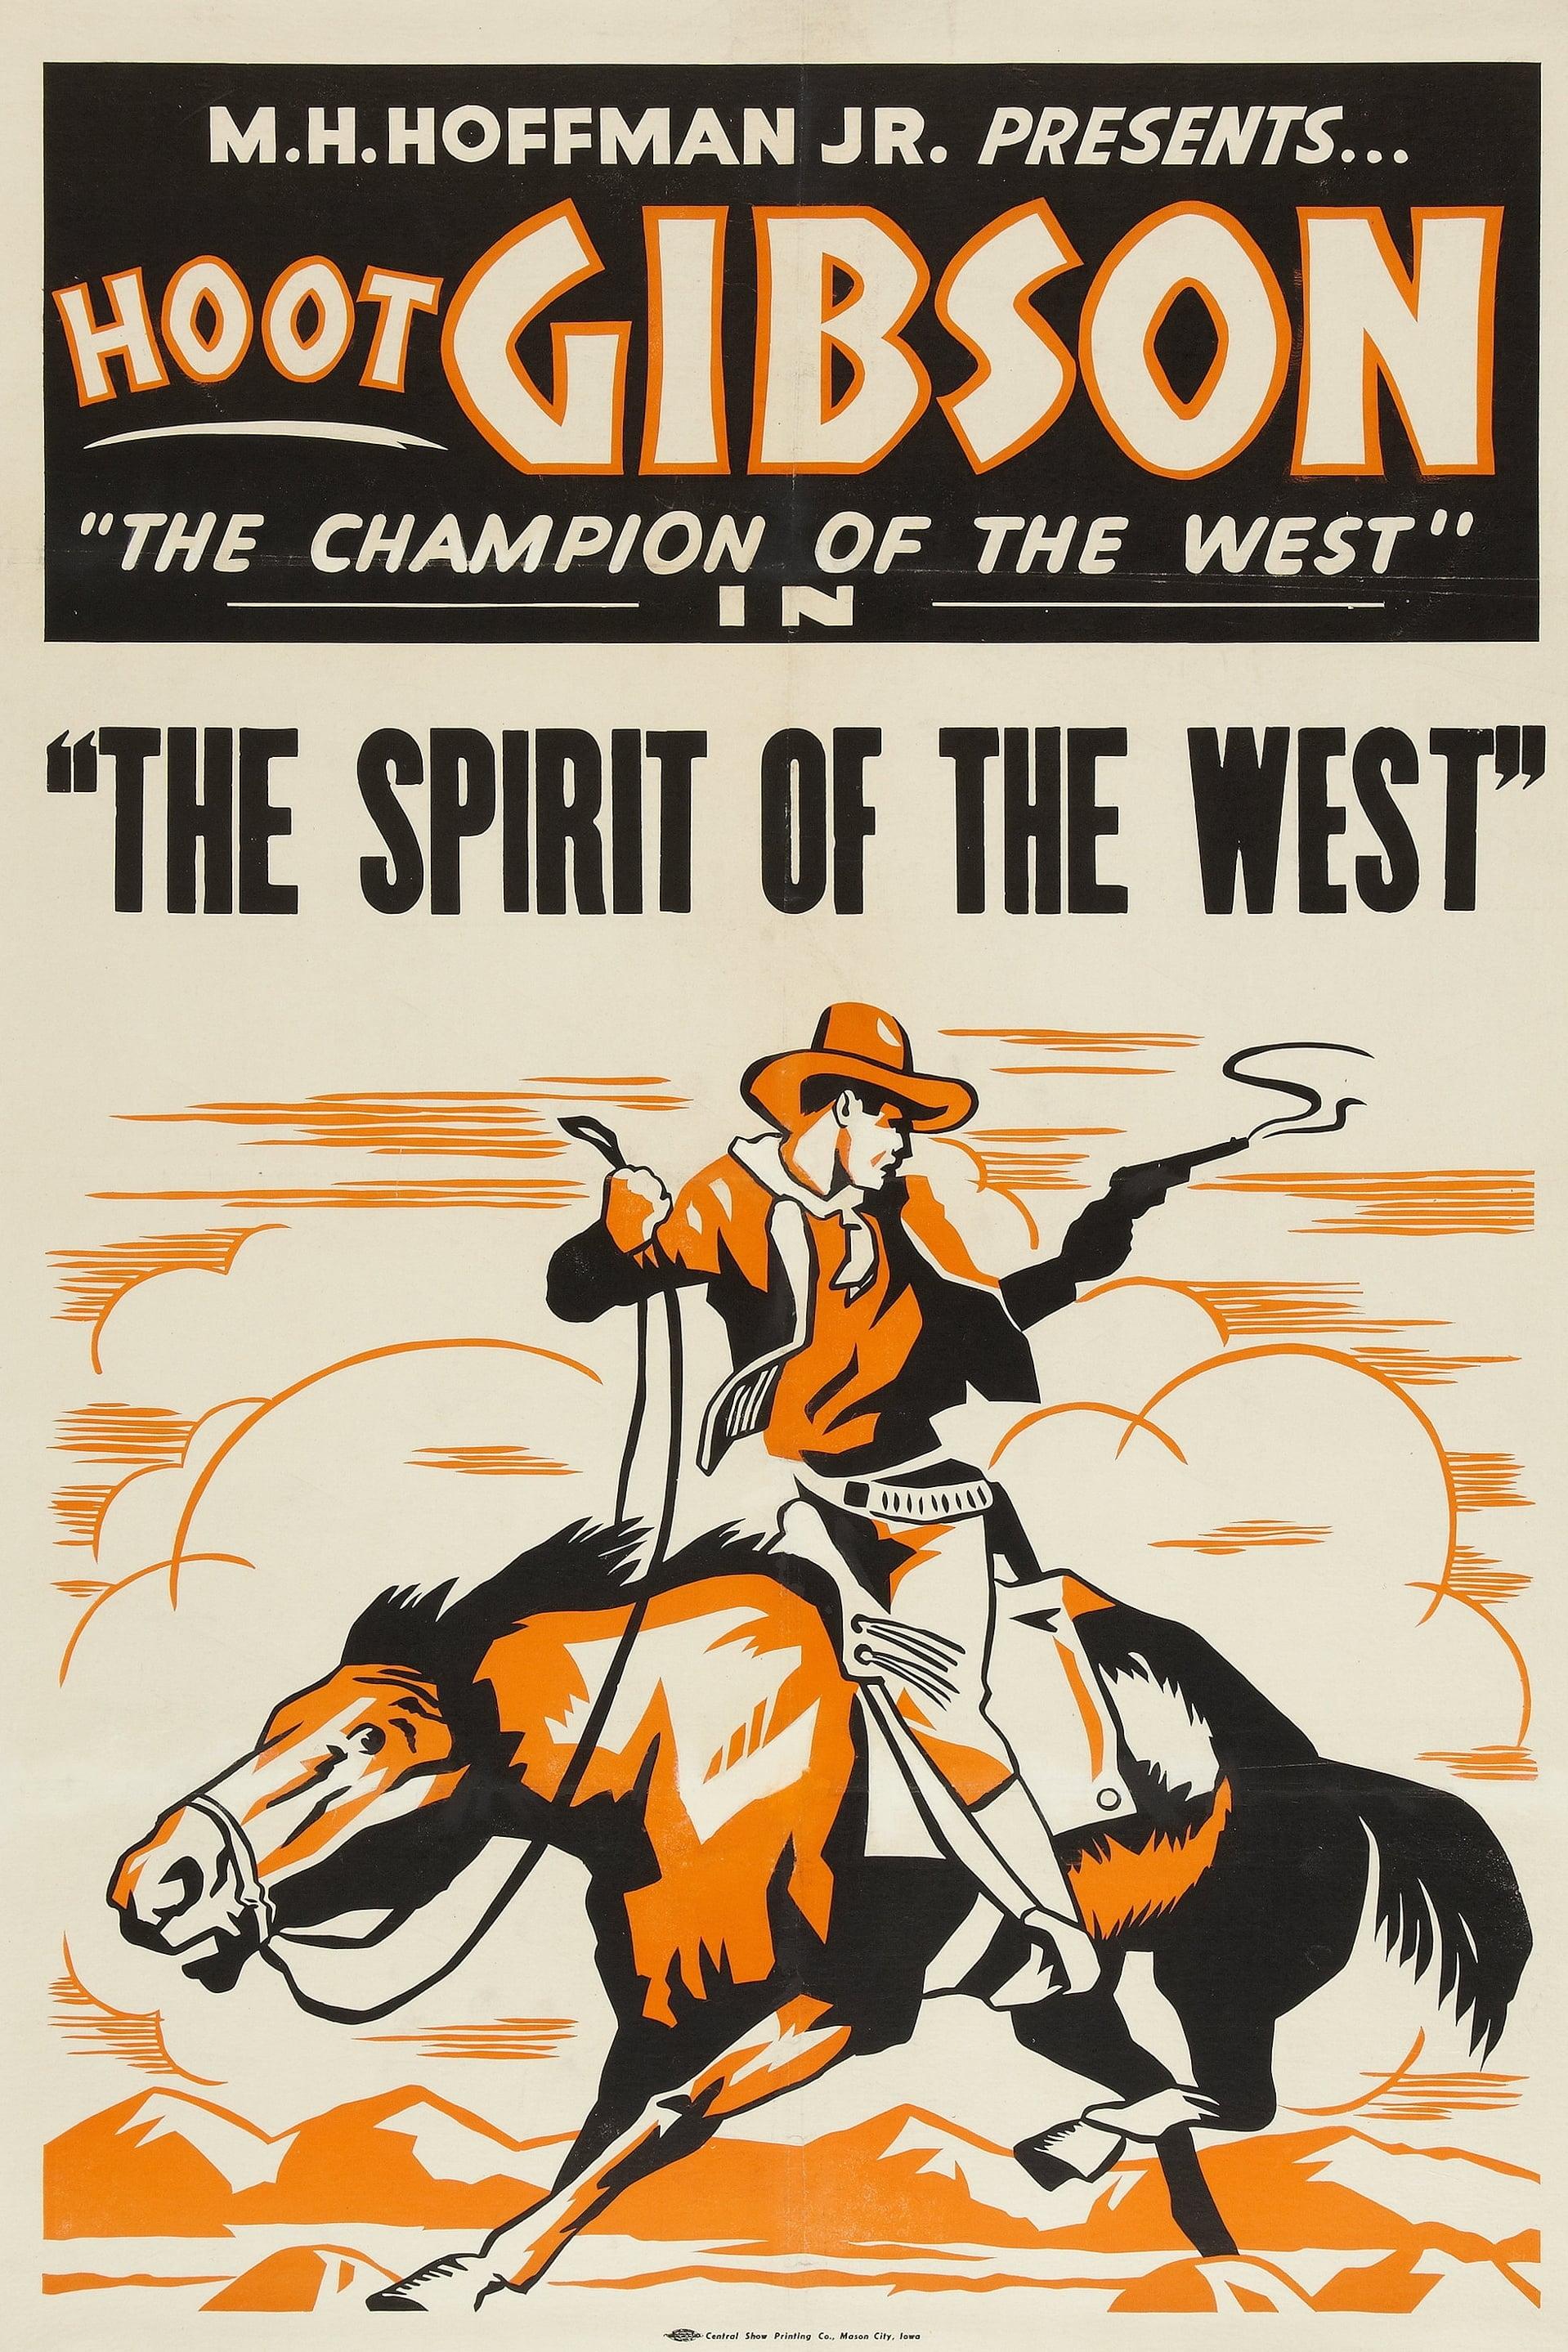 The Spirit of the West poster